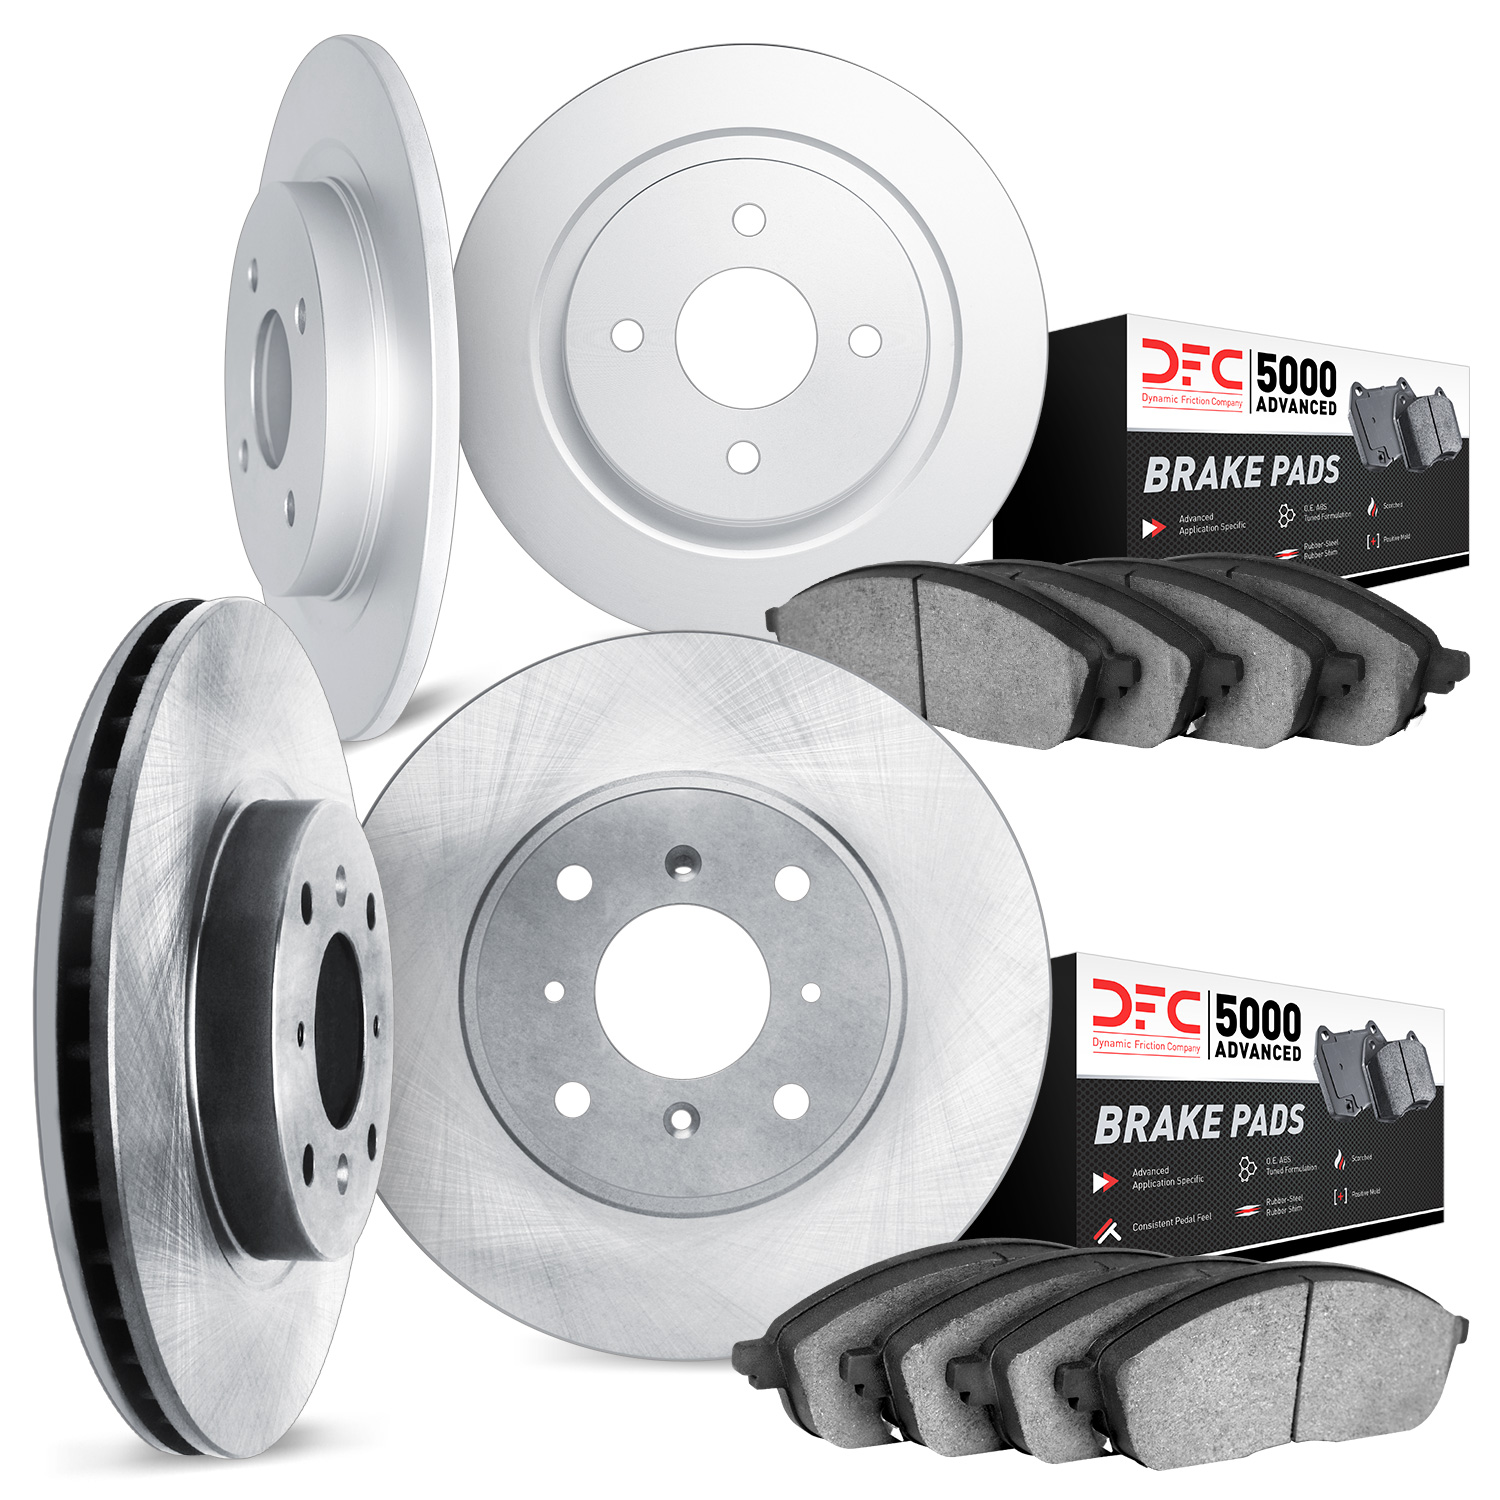 6504-47913 Brake Rotors w/5000 Advanced Brake Pads Kit, 2014-2016 GM, Position: Front and Rear